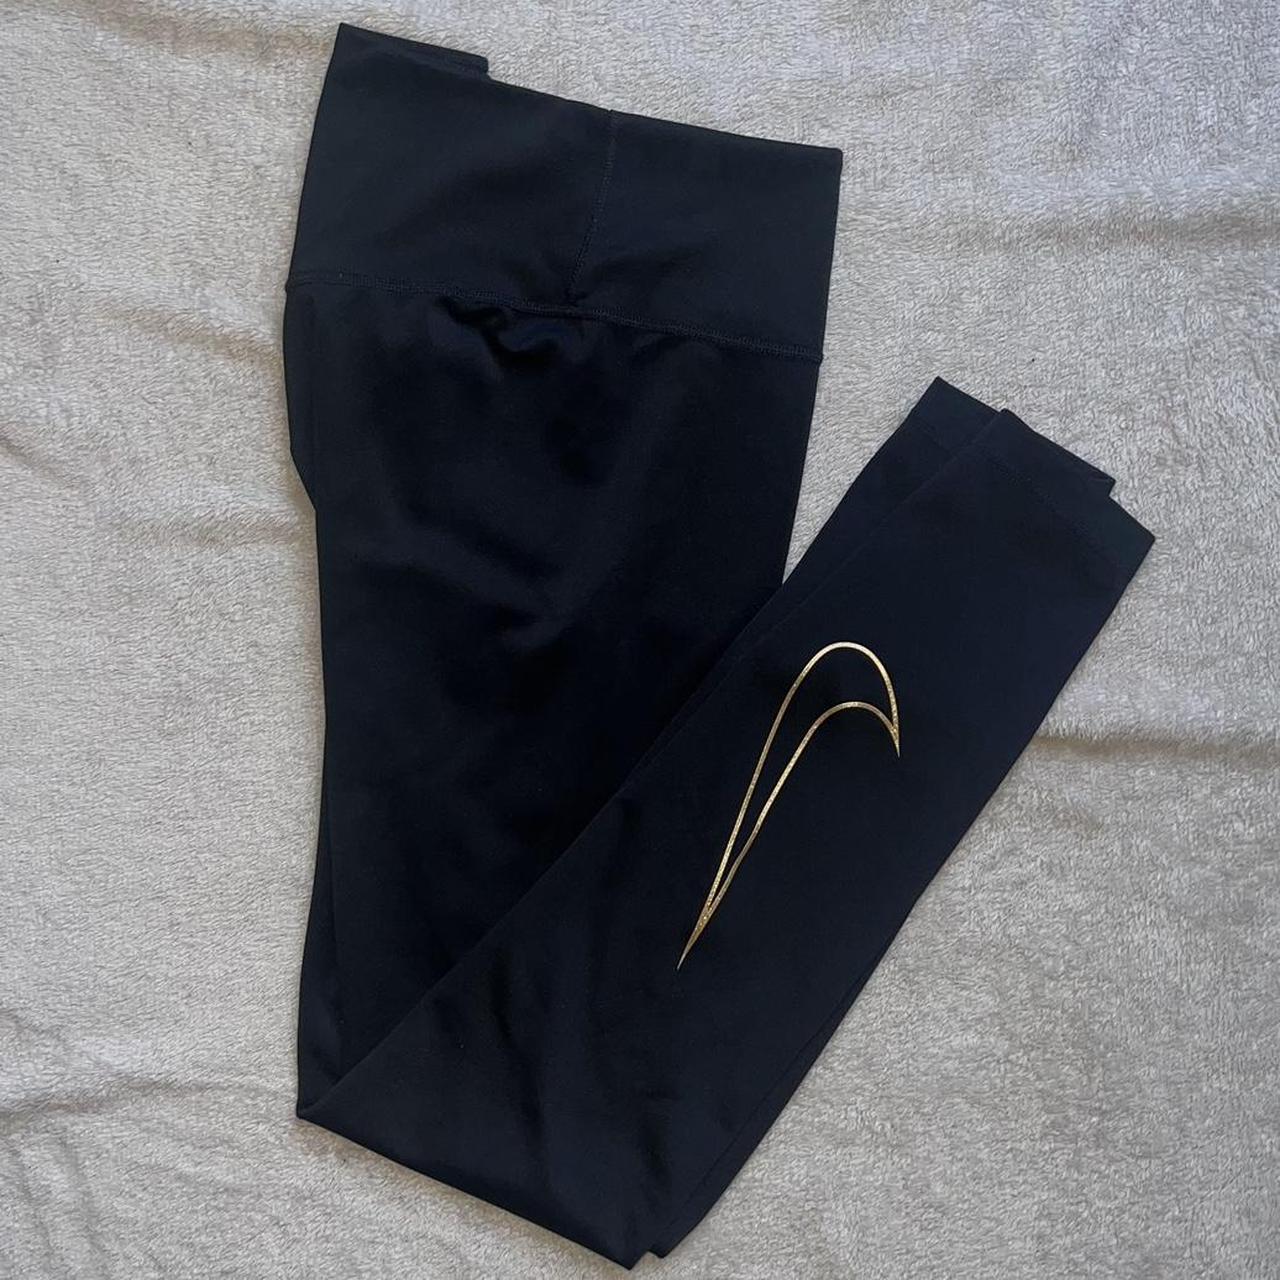 Nike dry-fit black workout leggings size small with - Depop